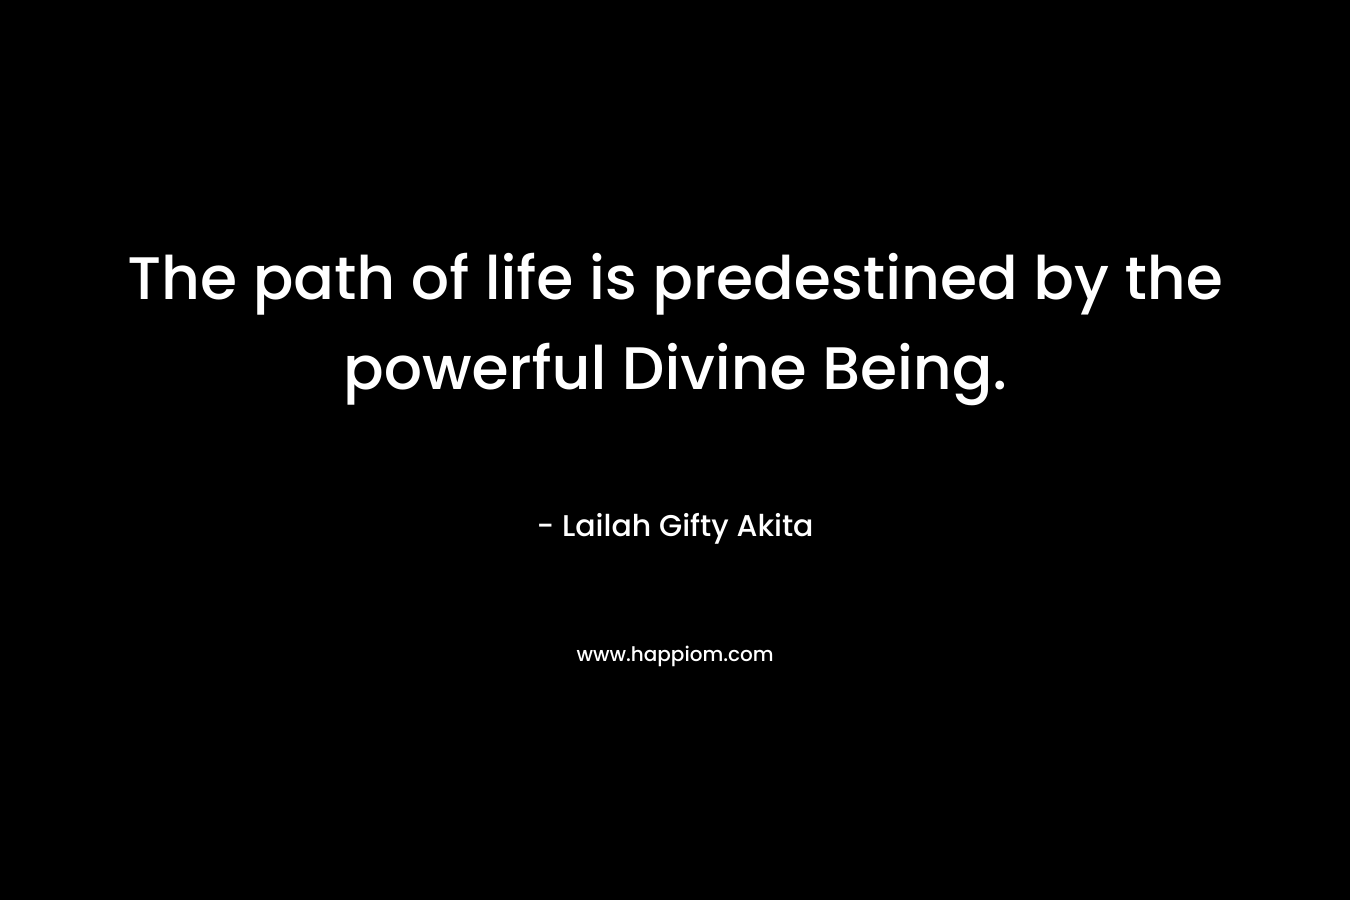 The path of life is predestined by the powerful Divine Being. – Lailah Gifty Akita